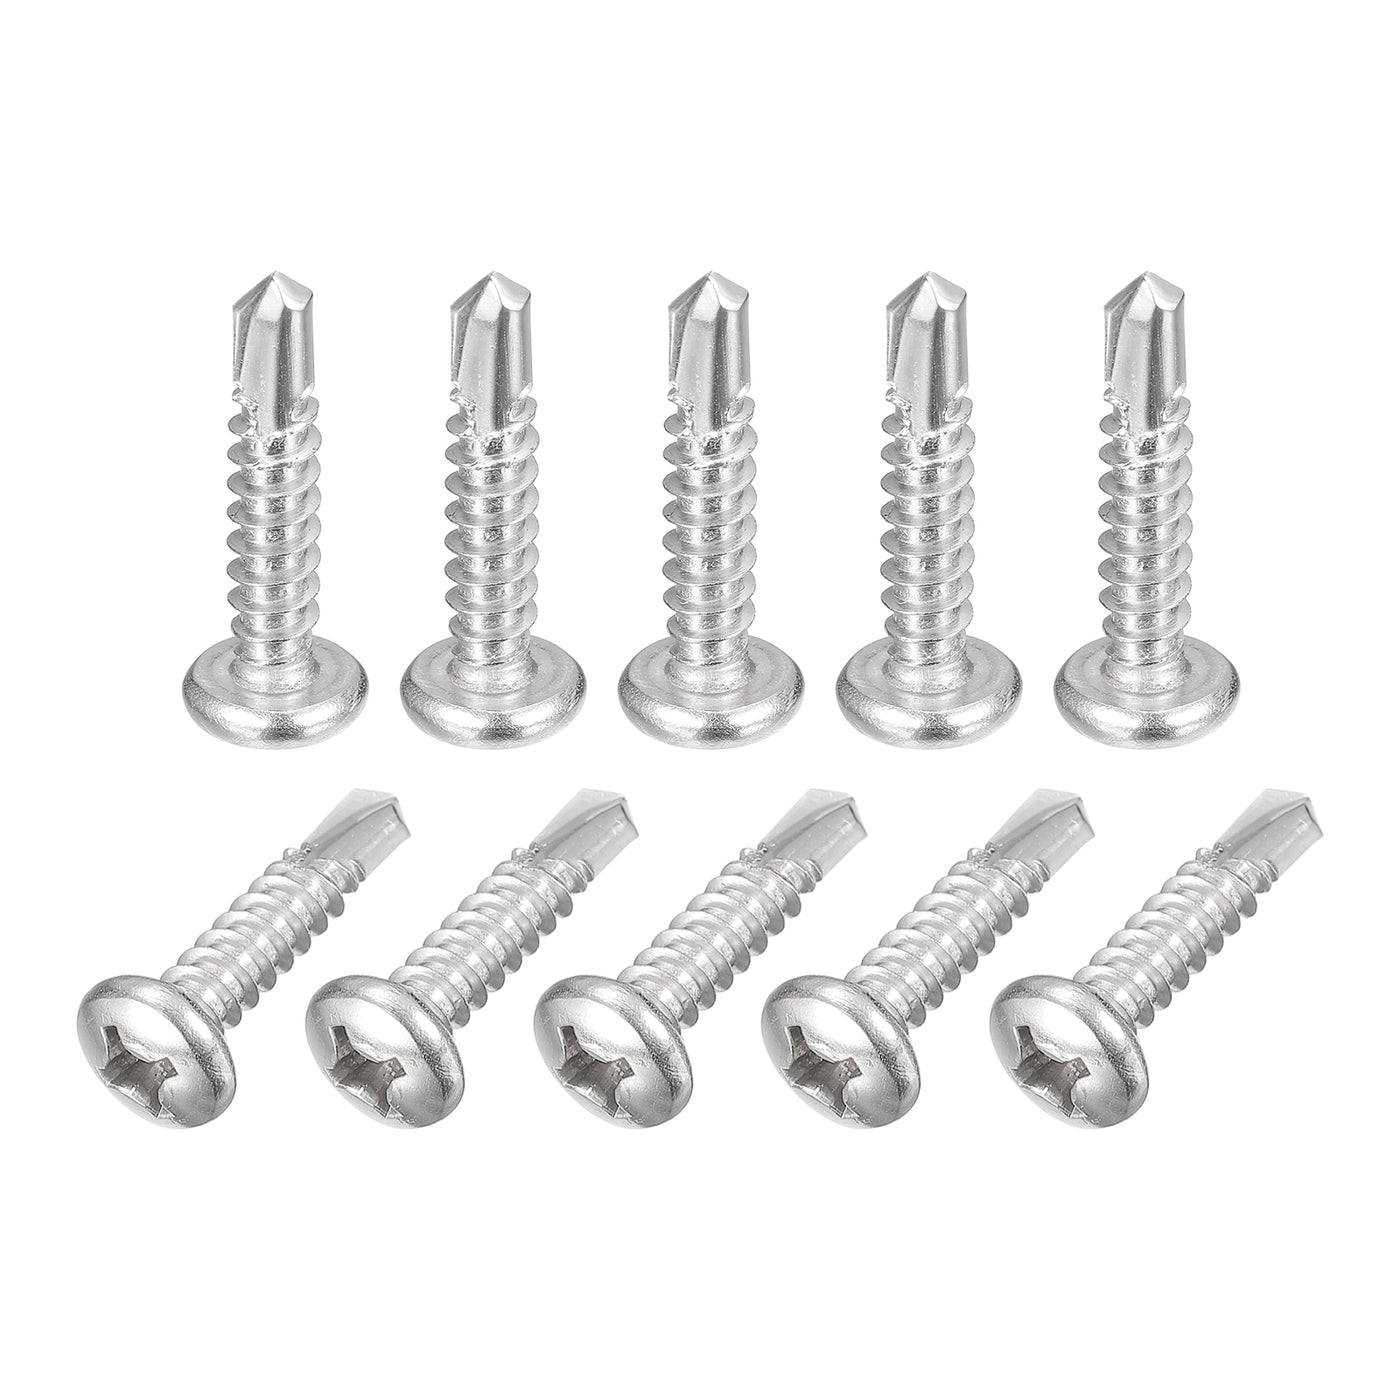 uxcell Uxcell #12 x 1" Self Drilling Screws, 20pcs Phillips Pan Head Self Tapping Screws